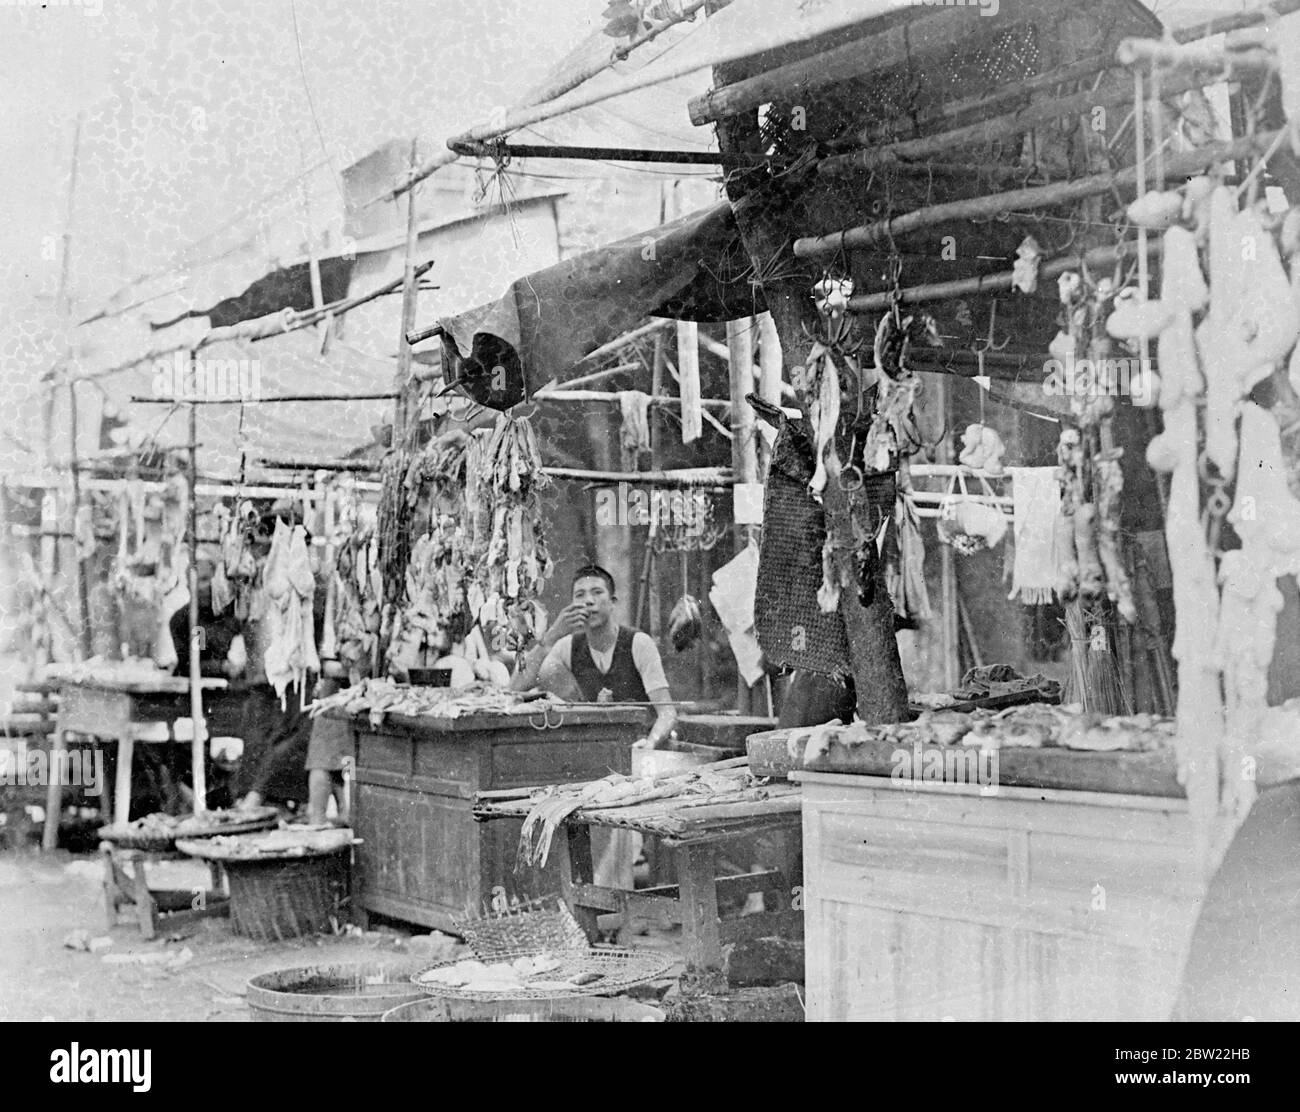 A thousand people are reported dead after a horrific dawn air raid on Canton, South China, by Japanese bombing planes. Many of the bombs fell in the densely populated poorer districts of the city. A butchers shop in a marketplace. 23 September 1937 Stock Photo